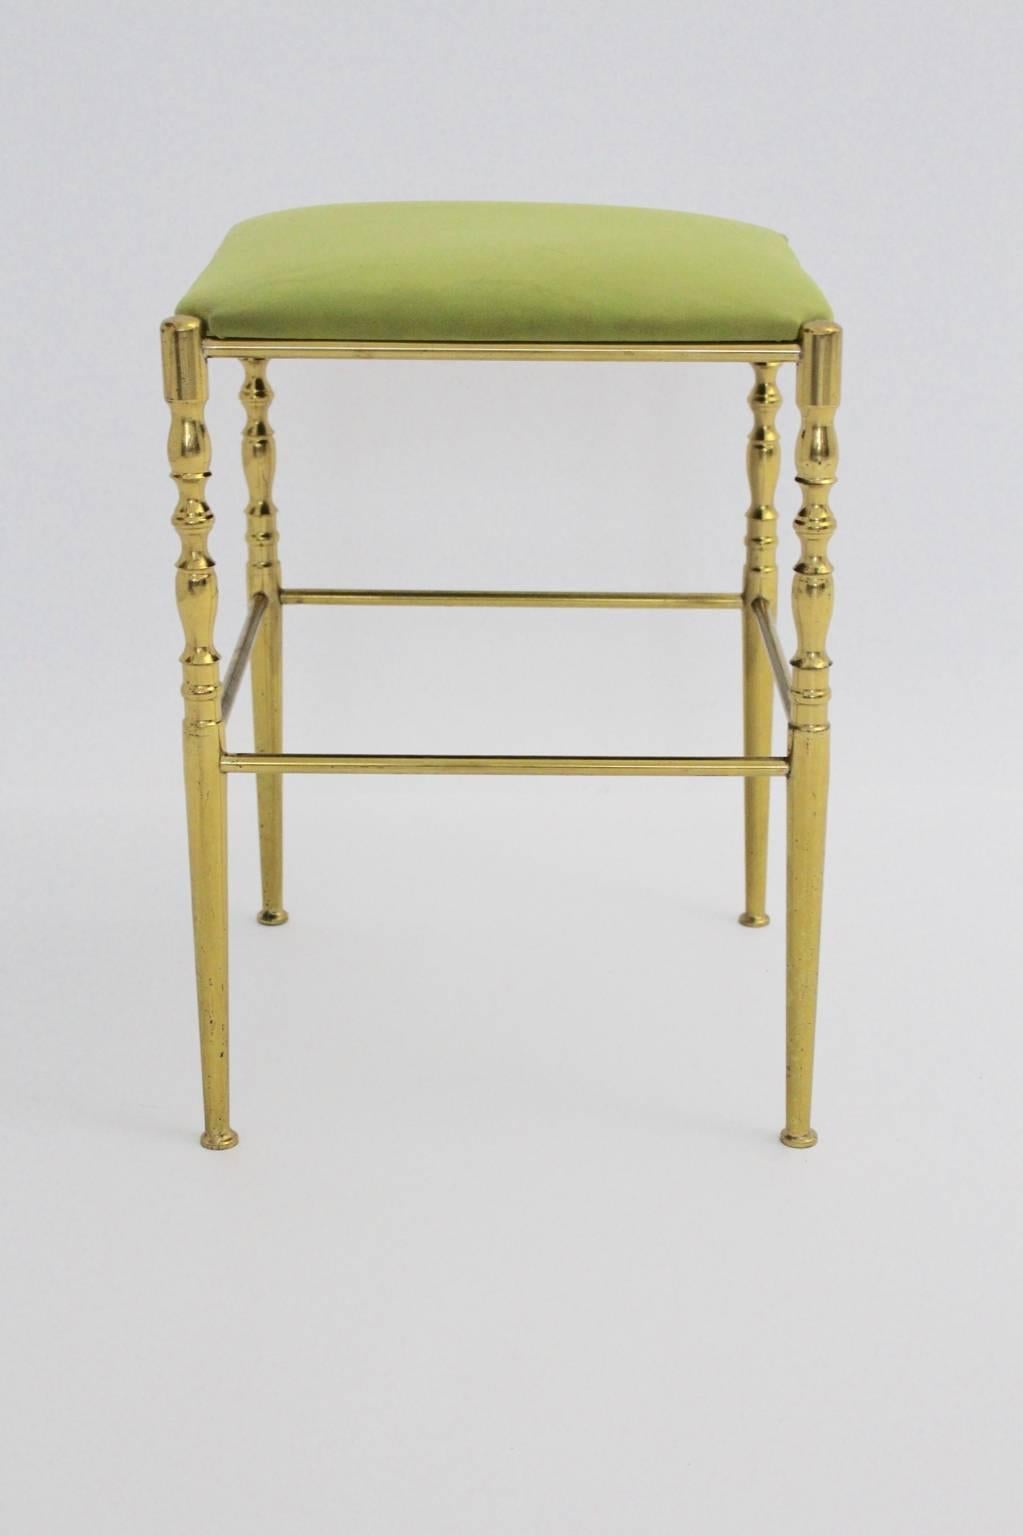 This brass stool features an upholstered seat with a new covering with grass green velvet fabric.
The stool was designed in the 1950s by Chiavari, Italy.
The vintage condition is very good with wonderful brass patina.
all measures are approximate